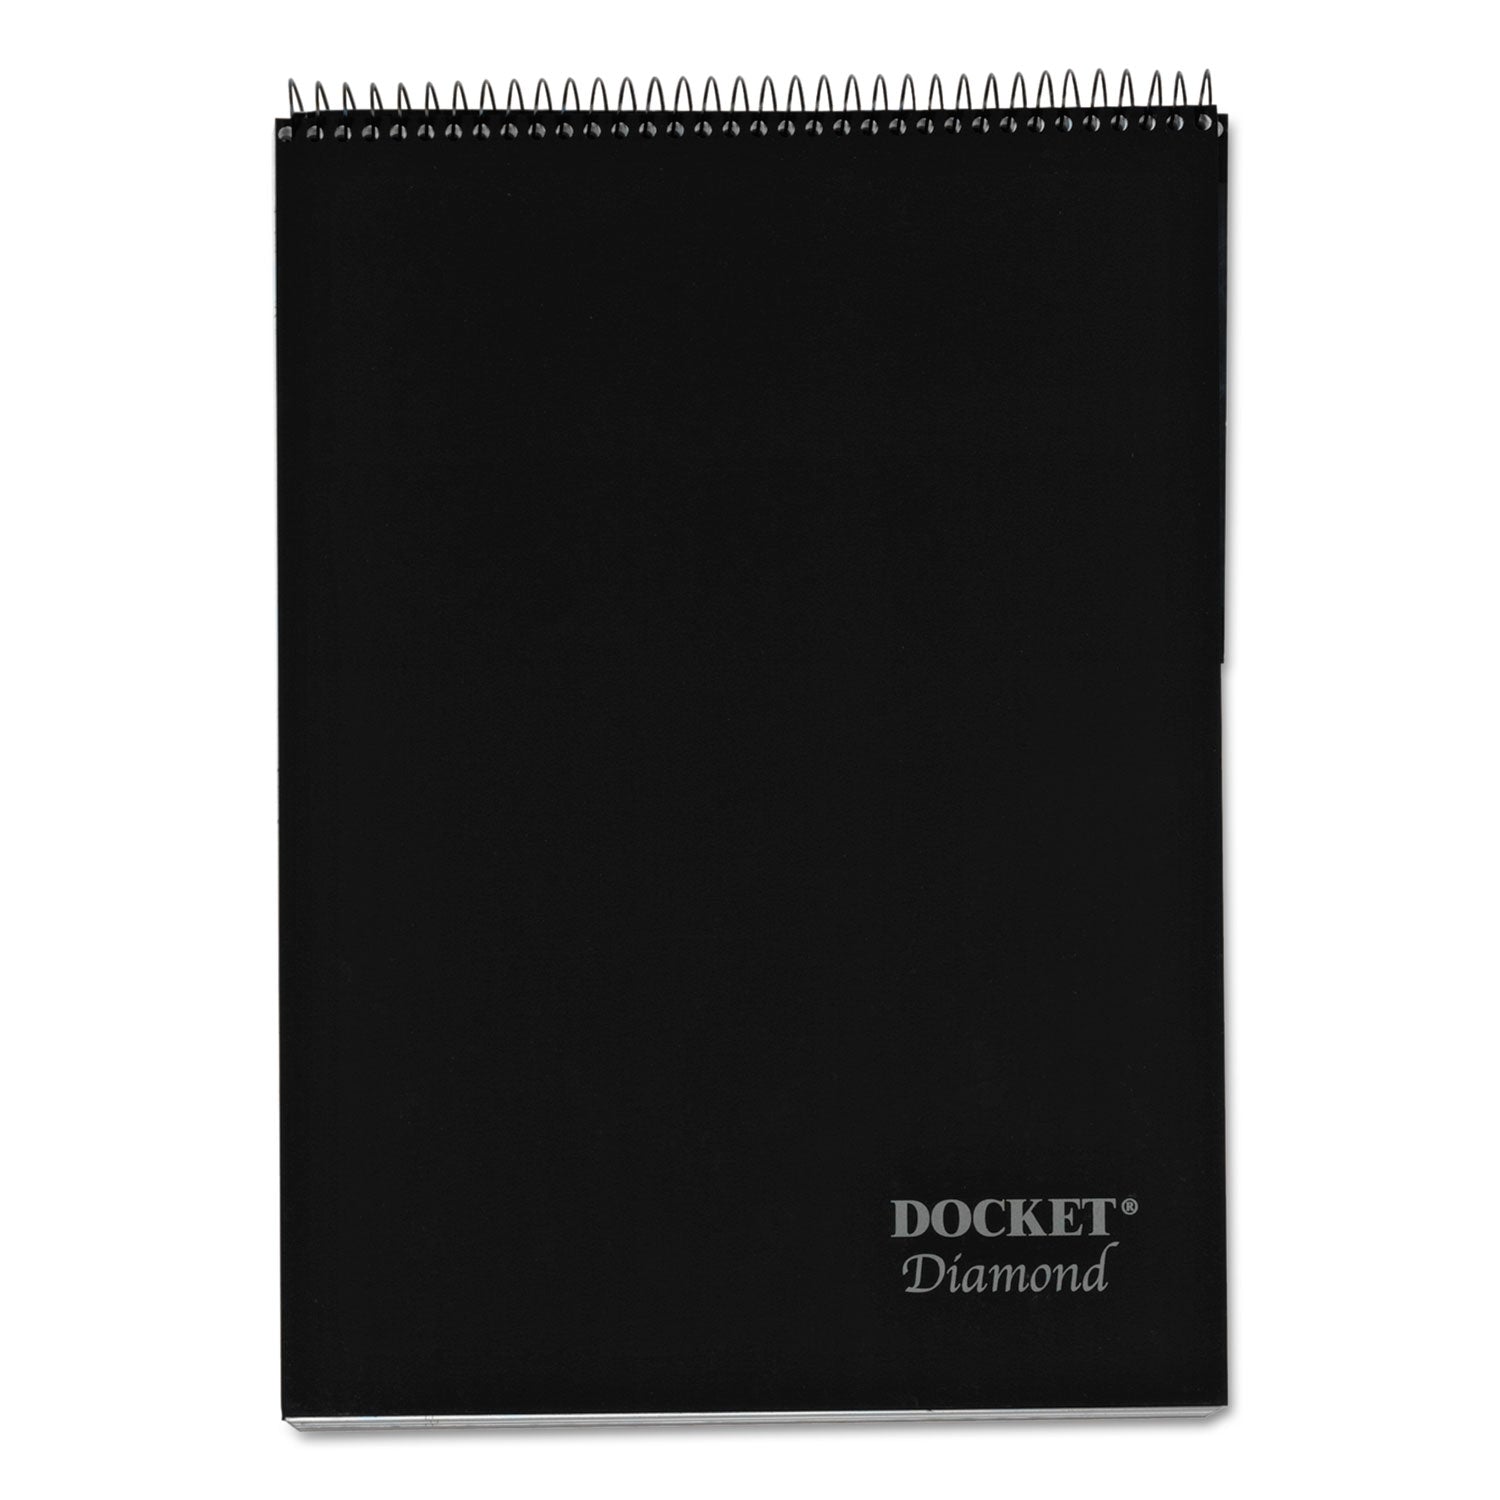 Docket Diamond Top-Wire Ruled Planning Pad, Wide/Legal Rule, Black Cover, 60 White 8.5 x 11.75 Sheets - 